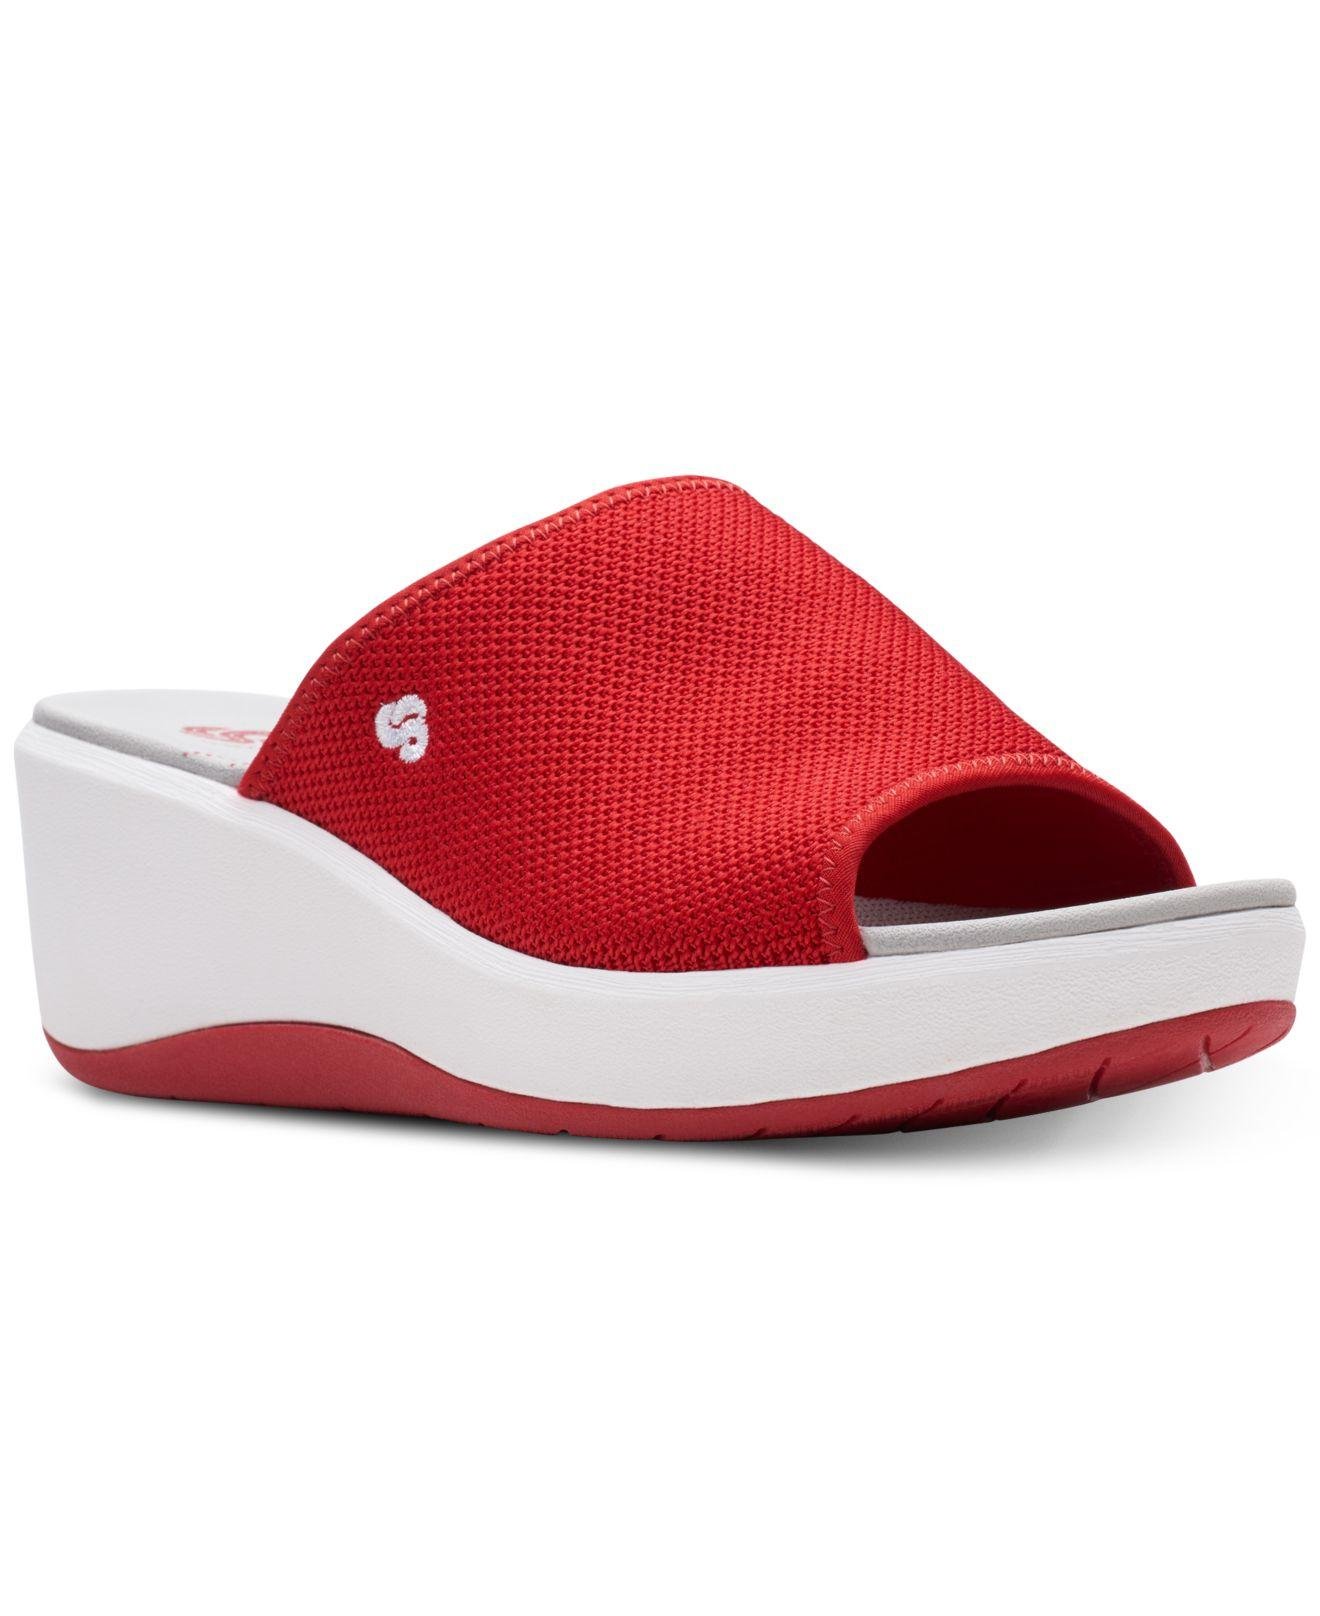 Clarks Cloudsteppers Step Cali Slide Sandals in Red | Lyst